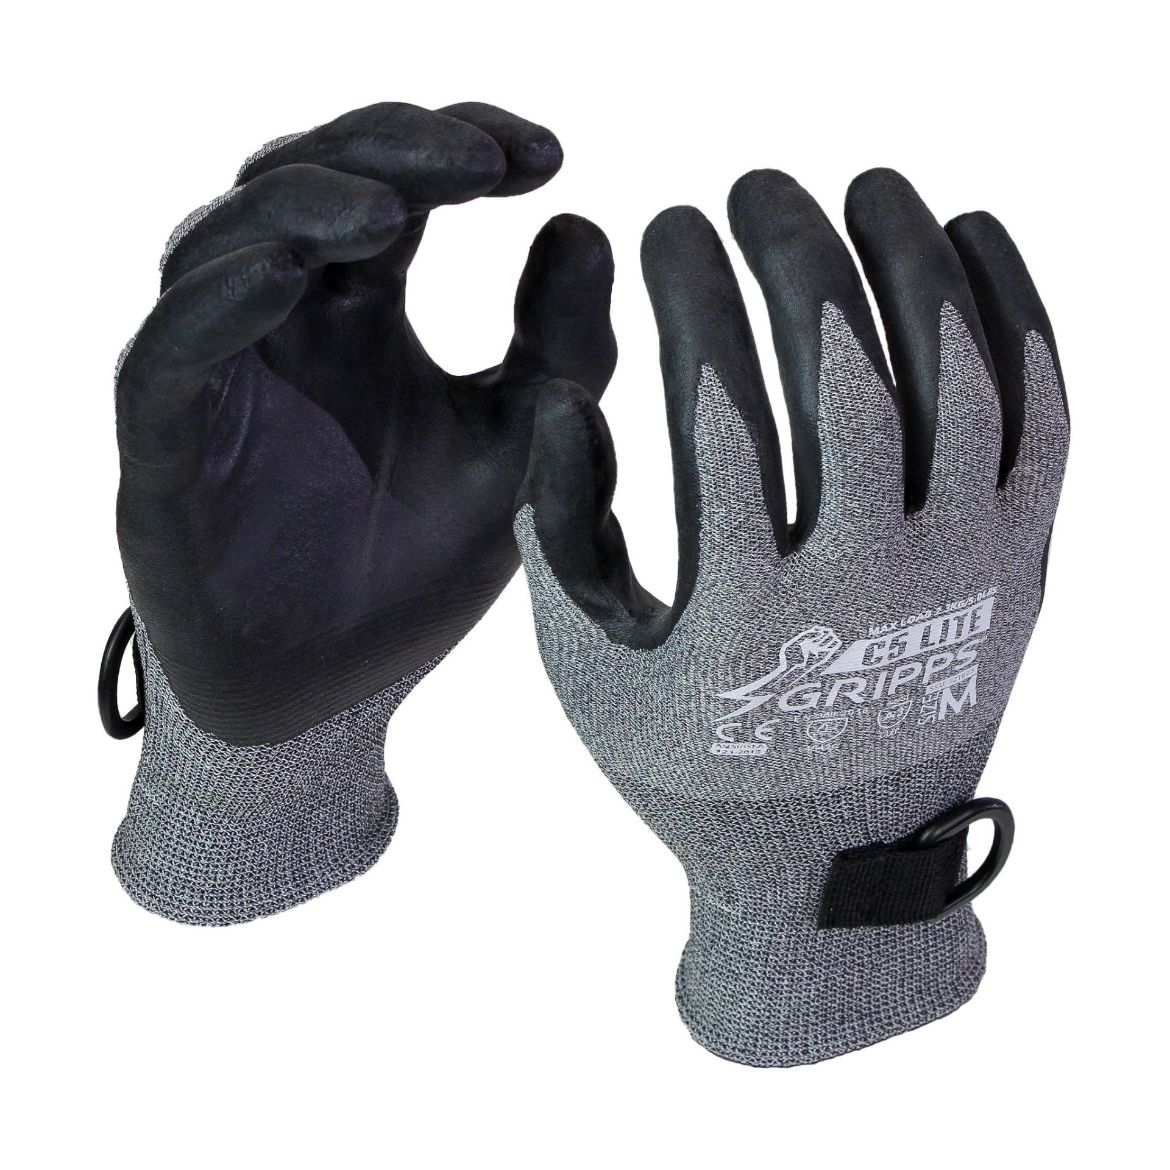 Picture of C5 FLEXILITE MKII GLOVES. AVAILABLE IN SIZE - S, M, L, XL, 2XL